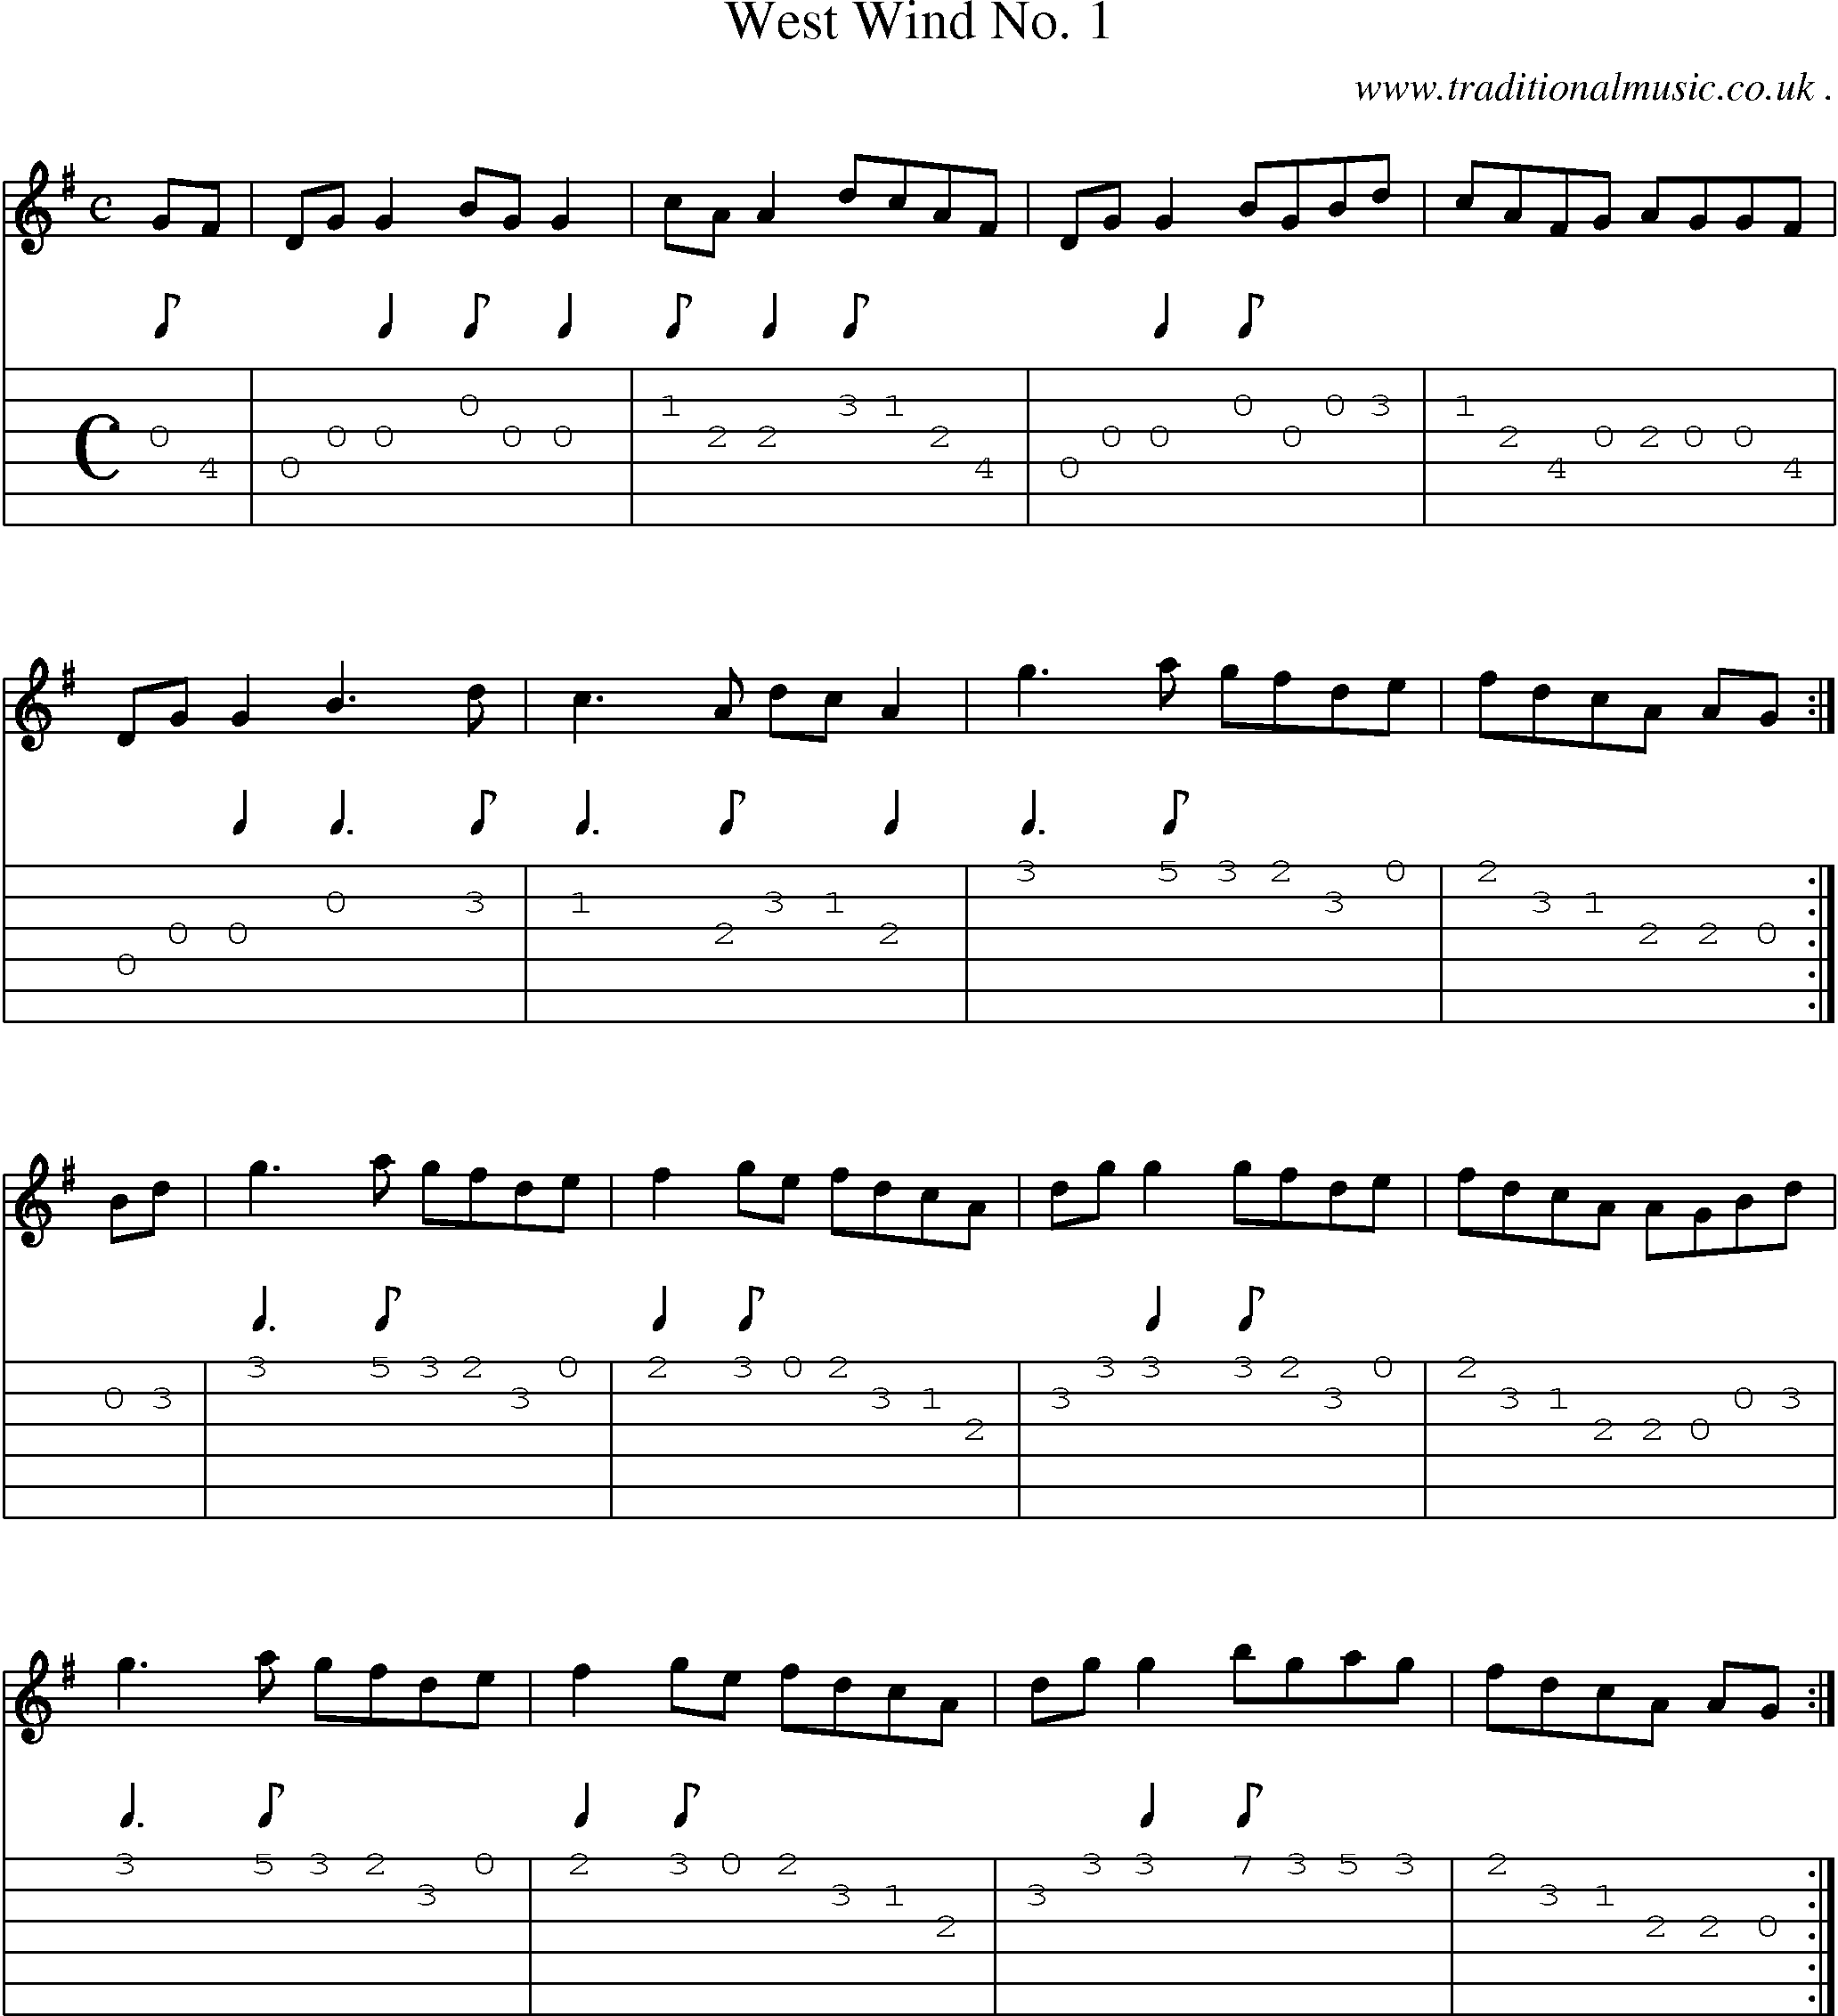 Sheet-Music and Guitar Tabs for West Wind No 1